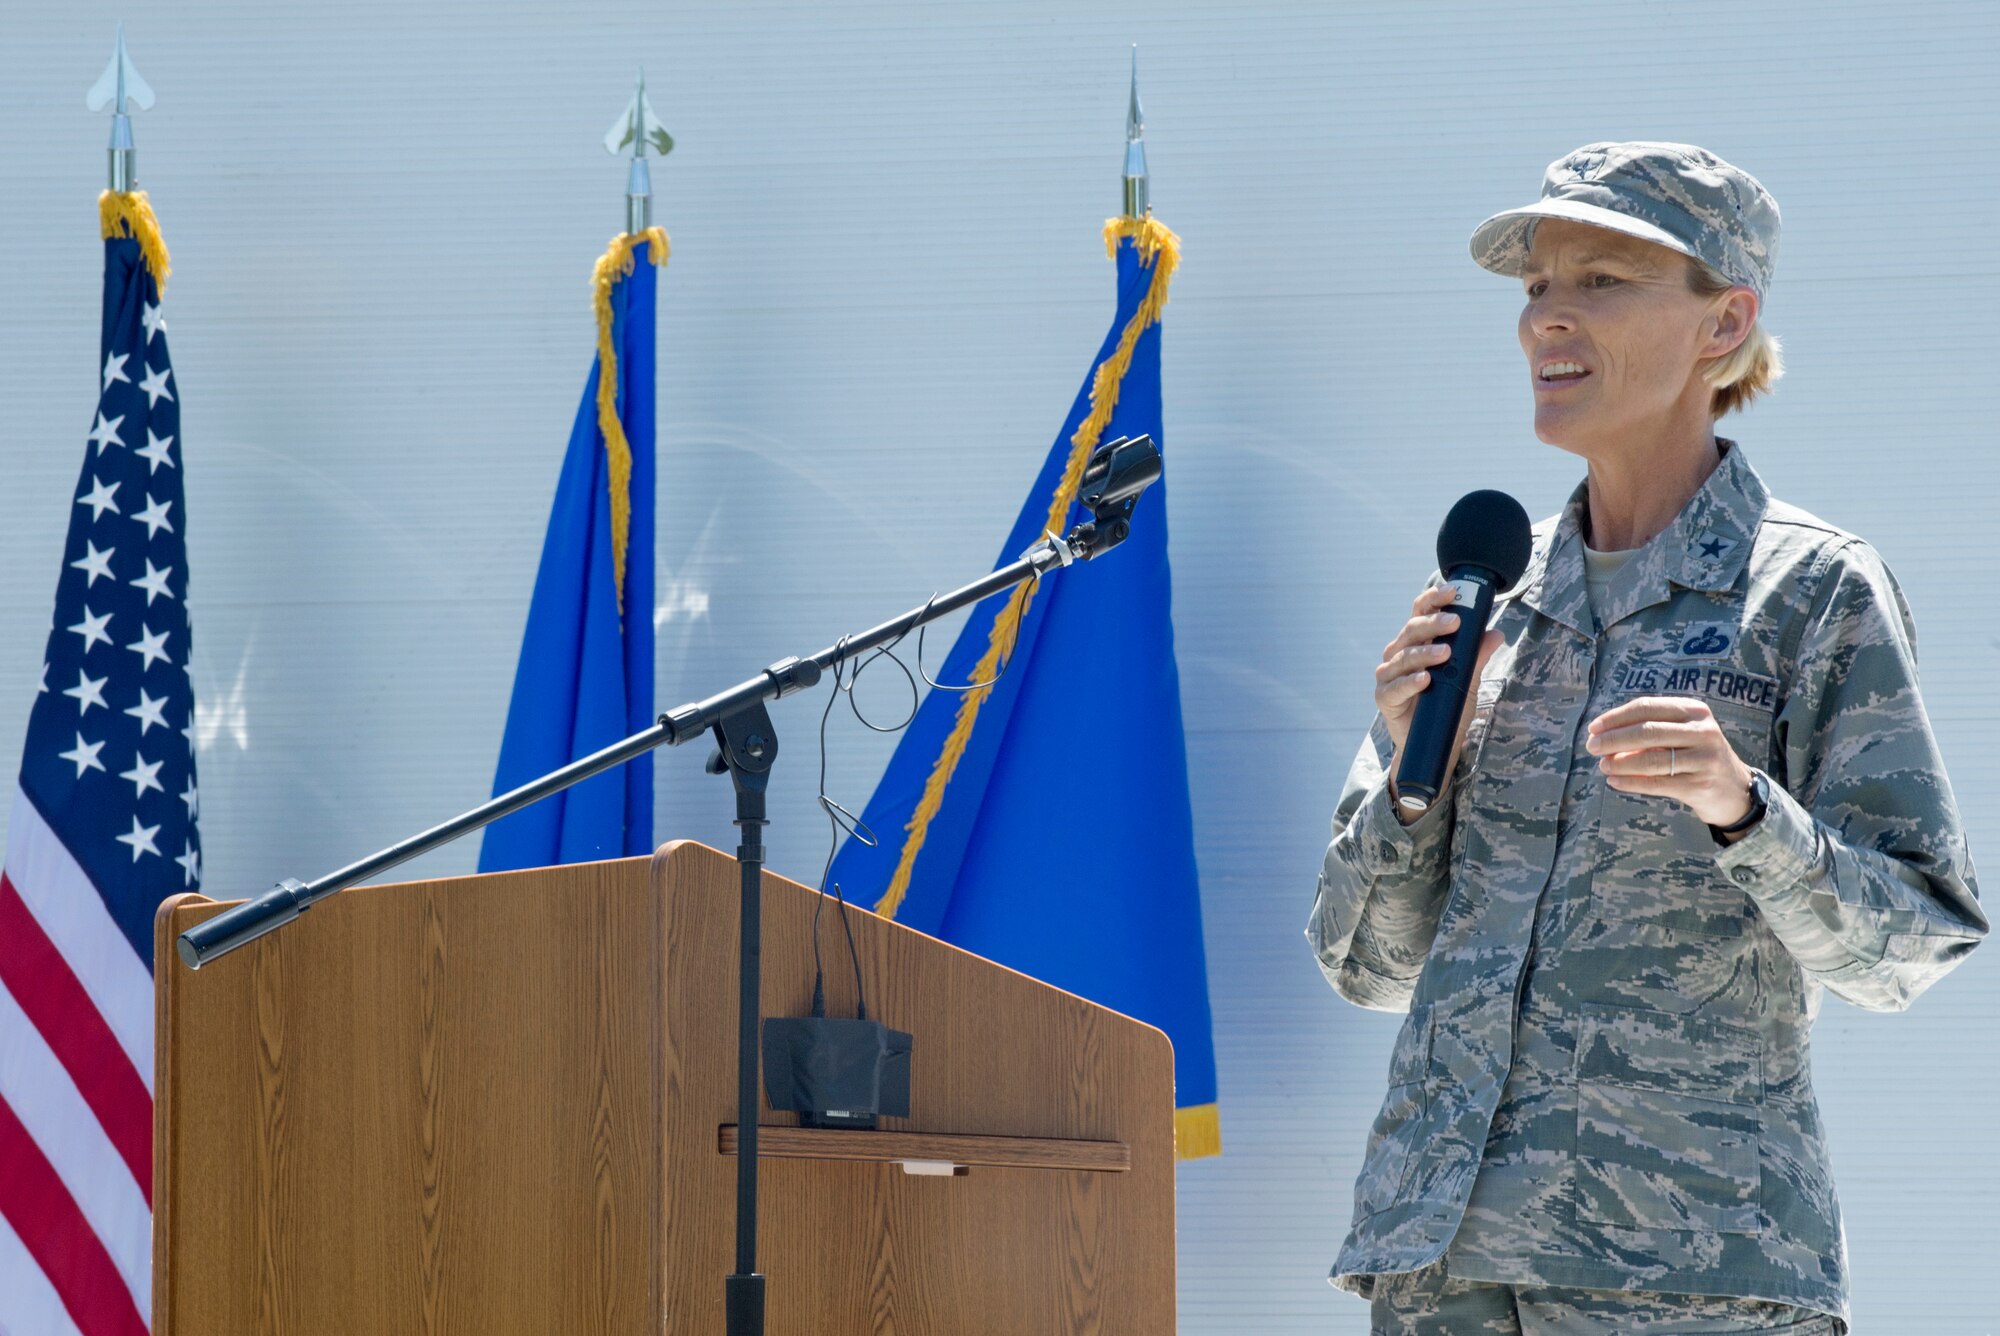 Brig. Gen. Heather Pringle, Joint Base San Antonio commander, addresses the crowd at the JBSA Airman Leadership School naming ceremony at JBSA-Lackland, Texas, May 11, 2018. The school was named in honor of Staff Sgt. Cierra Rogers, an alumnus, who died May 20, 2016, from injuries sustained after saving a family from a burning building April 29, 2016. (U.S. Air Force photo by Tech. Sgt. R.J. Biermann)